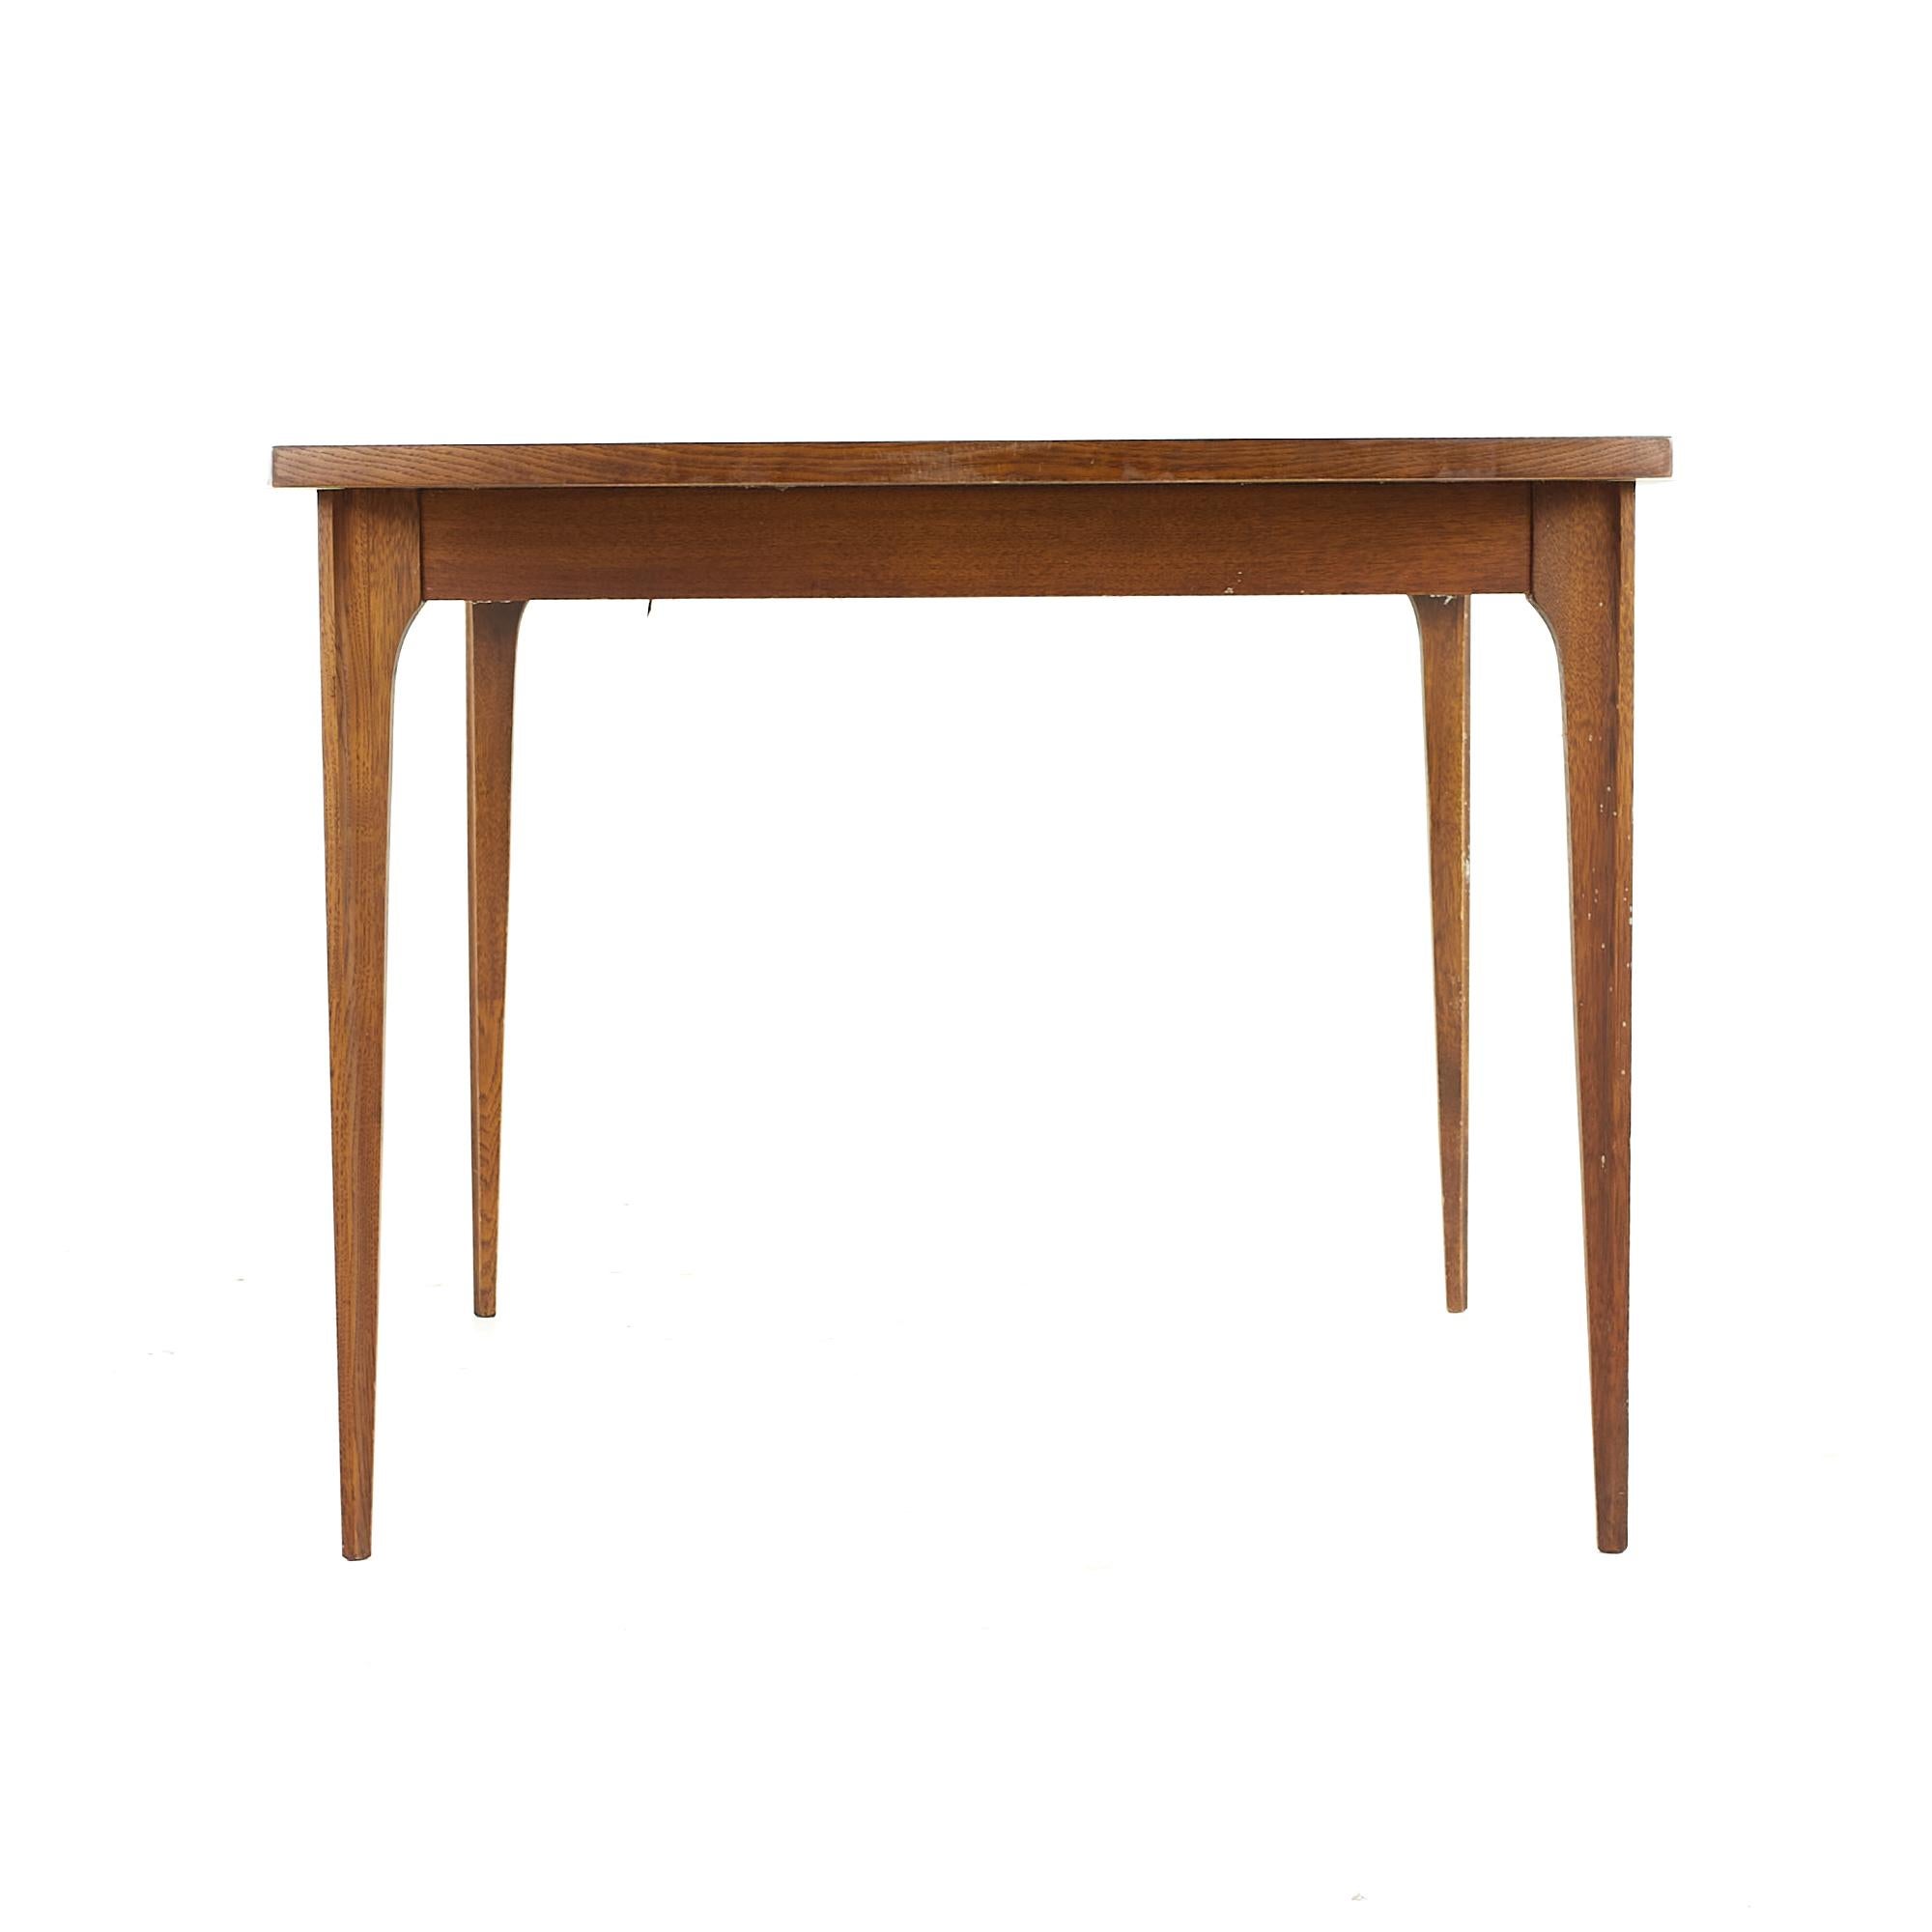 Broyhill Brasilia Midcentury Walnut Dining Table with 1 Leaf In Good Condition For Sale In Countryside, IL